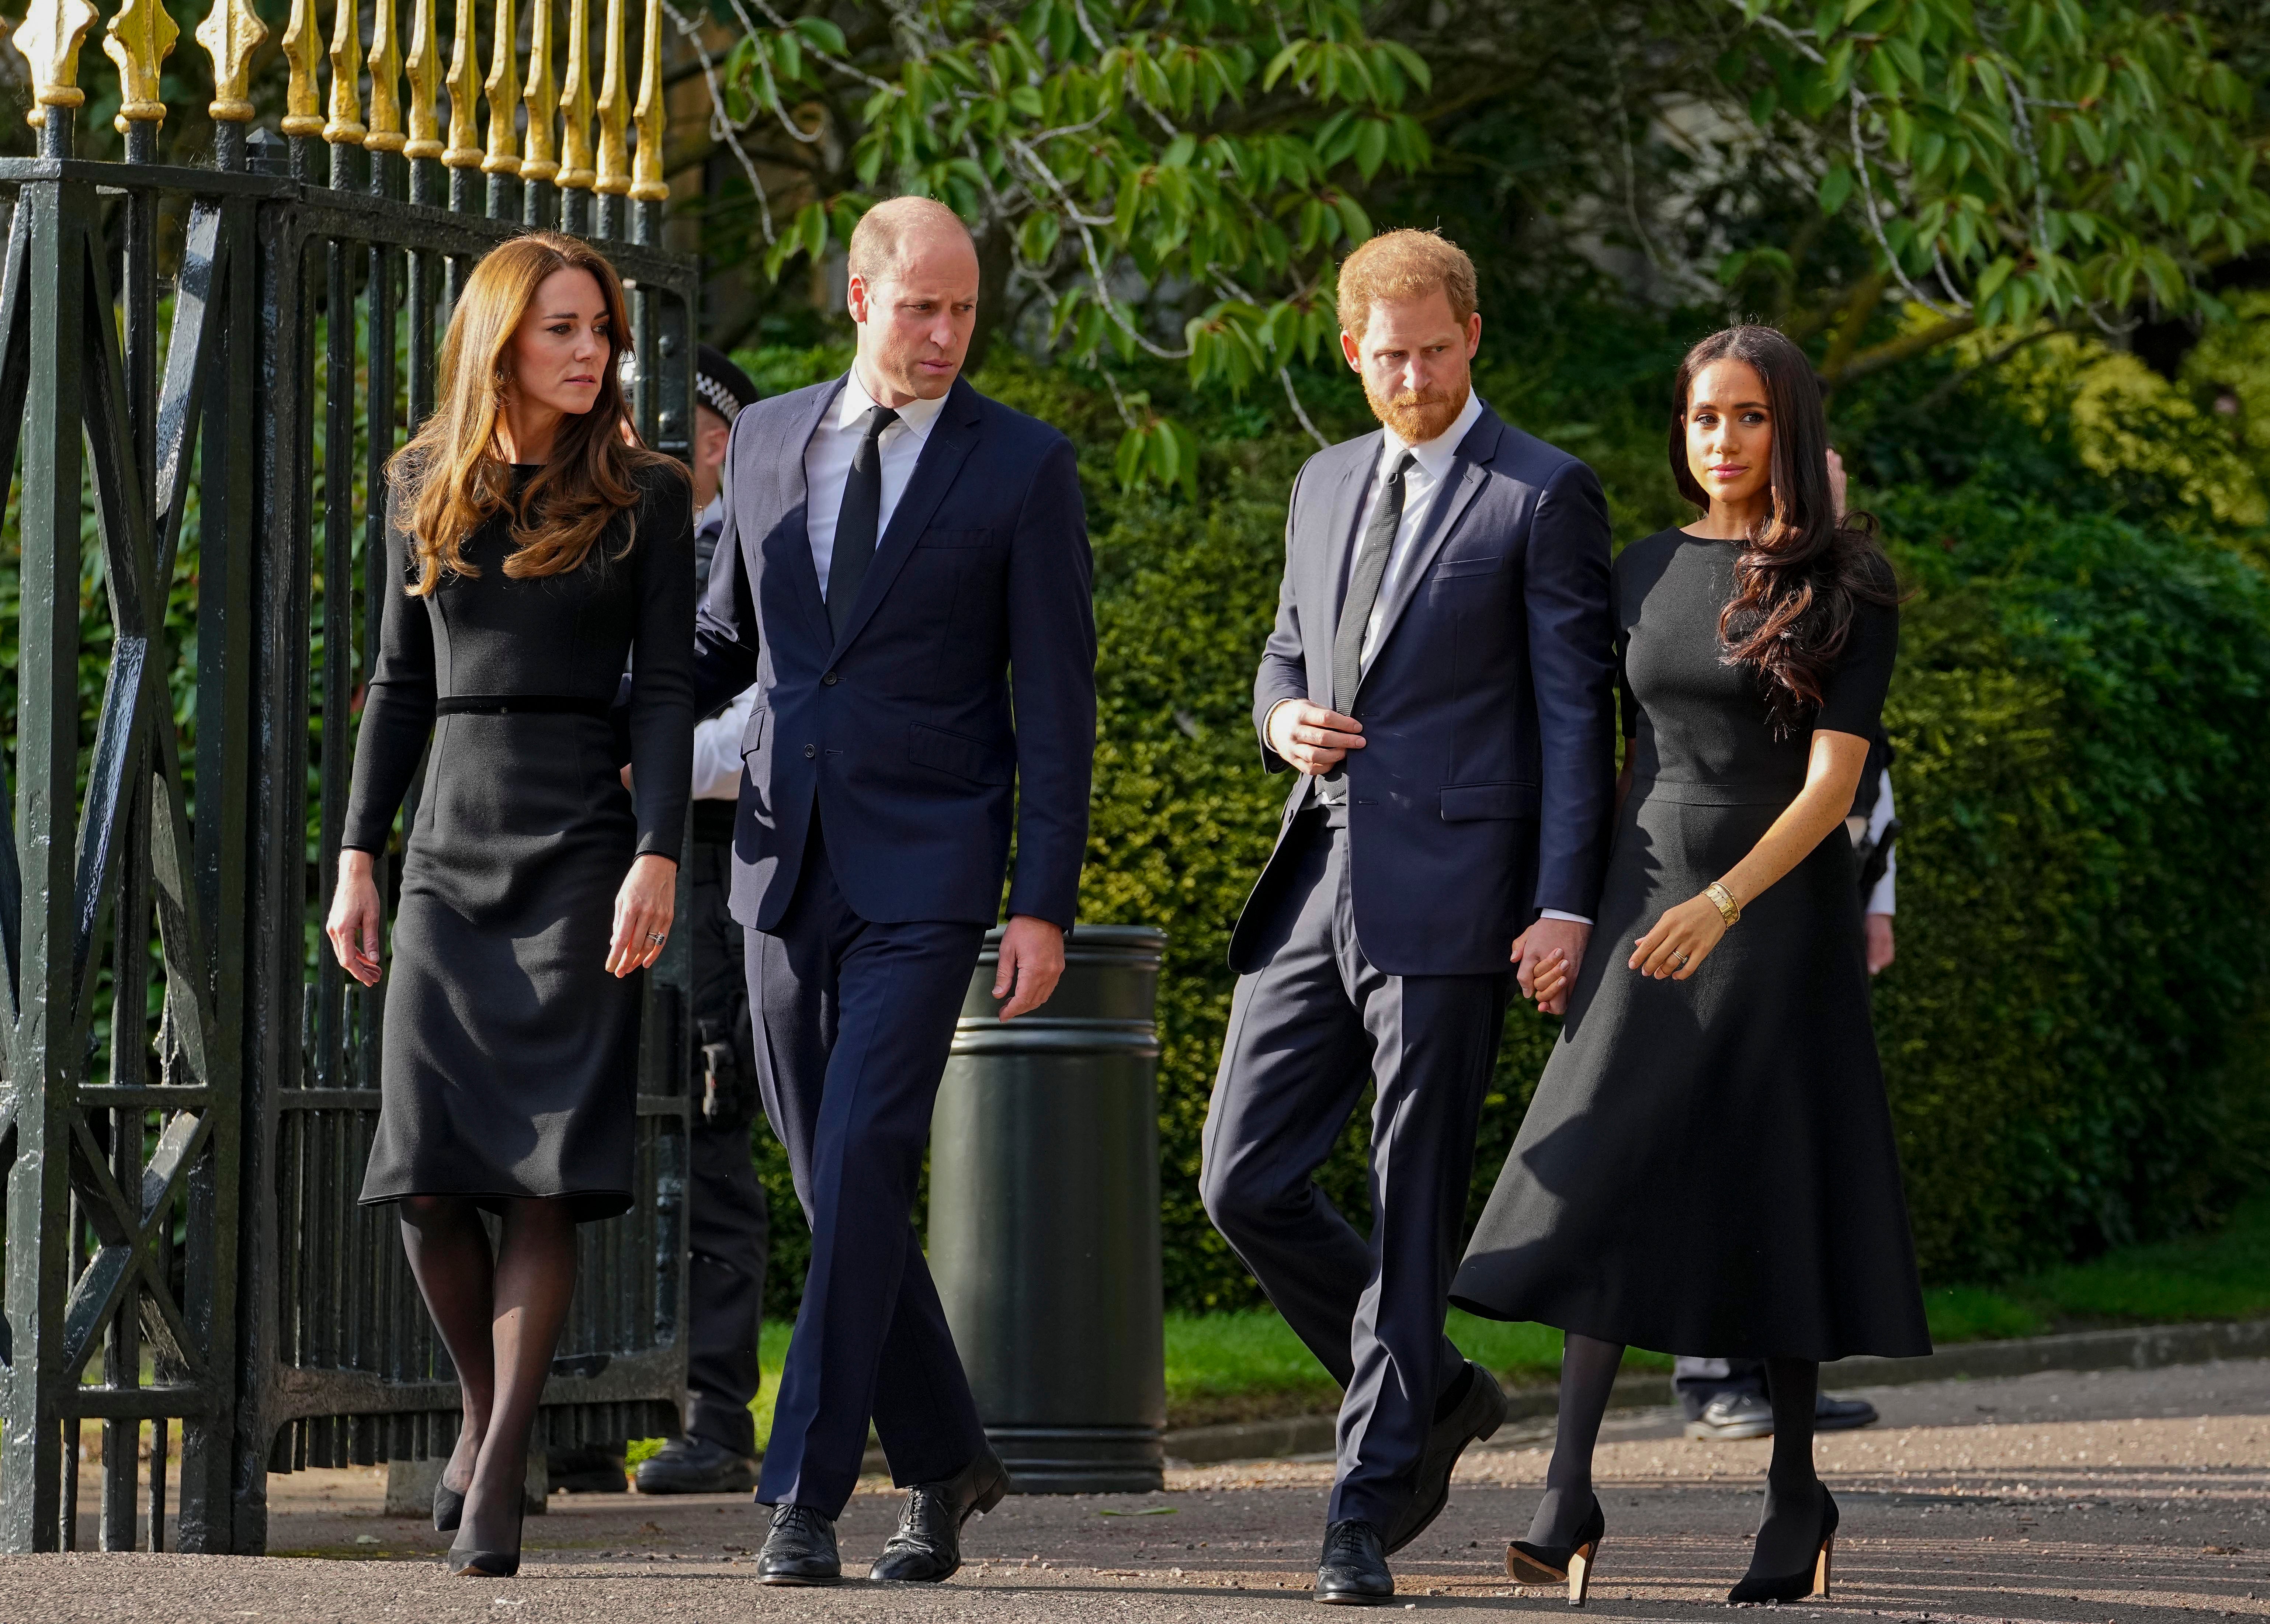 It has been some time since the Sussexes and Wales were on public good terms.